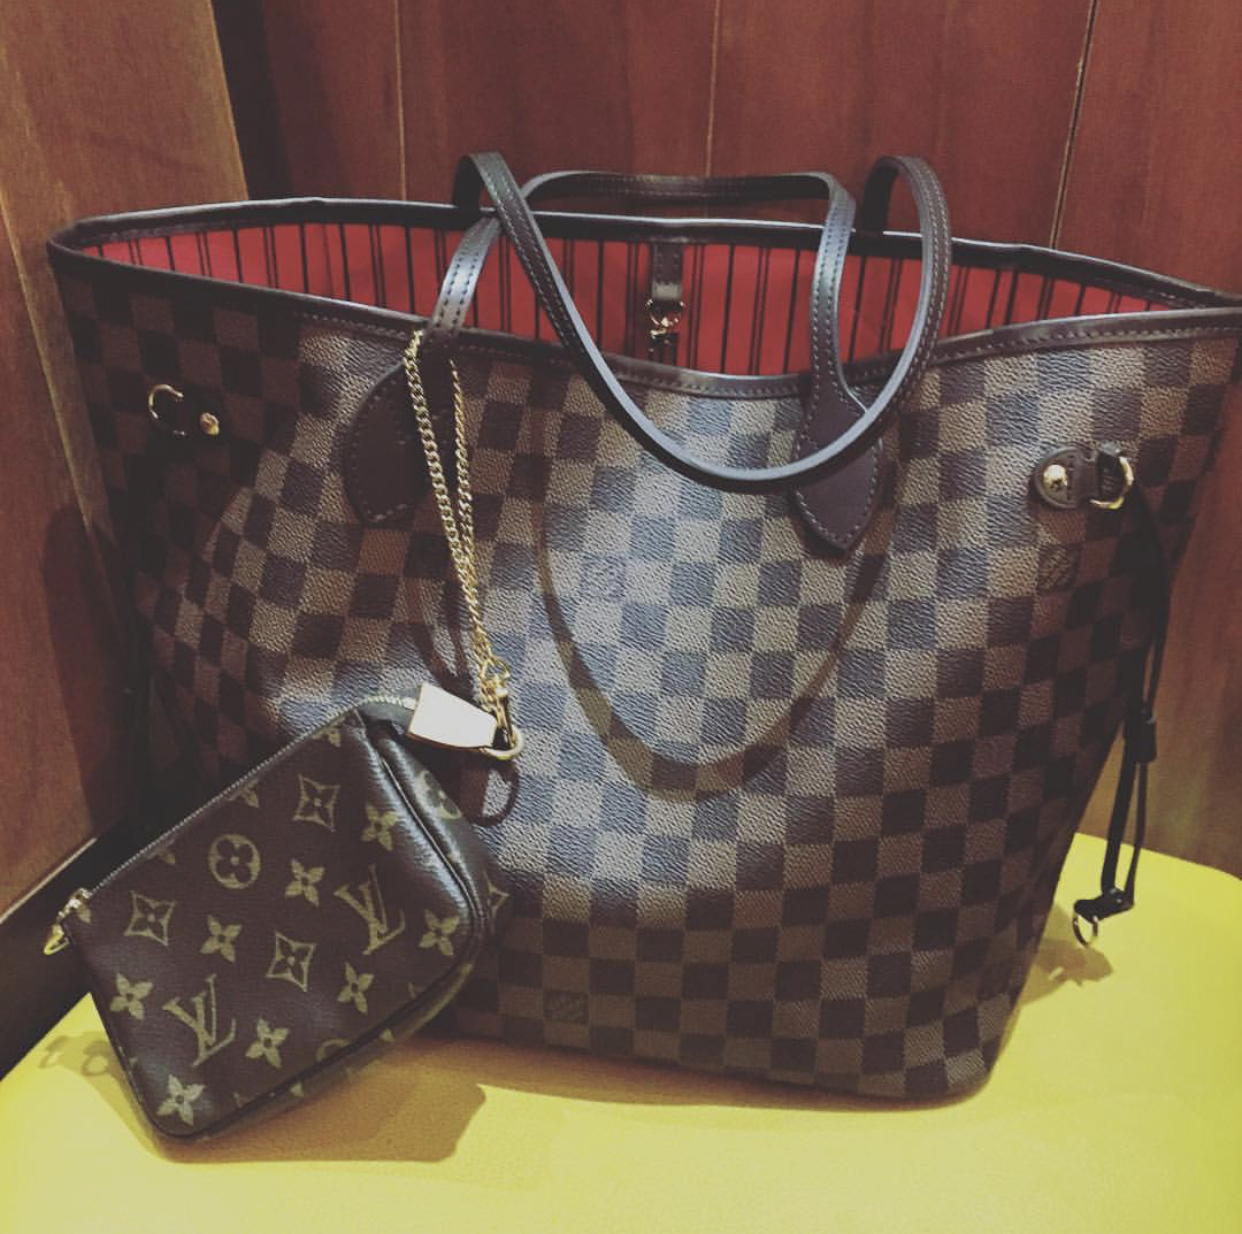 What Size? Louis Vuitton Neverfull Bag Size Review. - Lake Diary